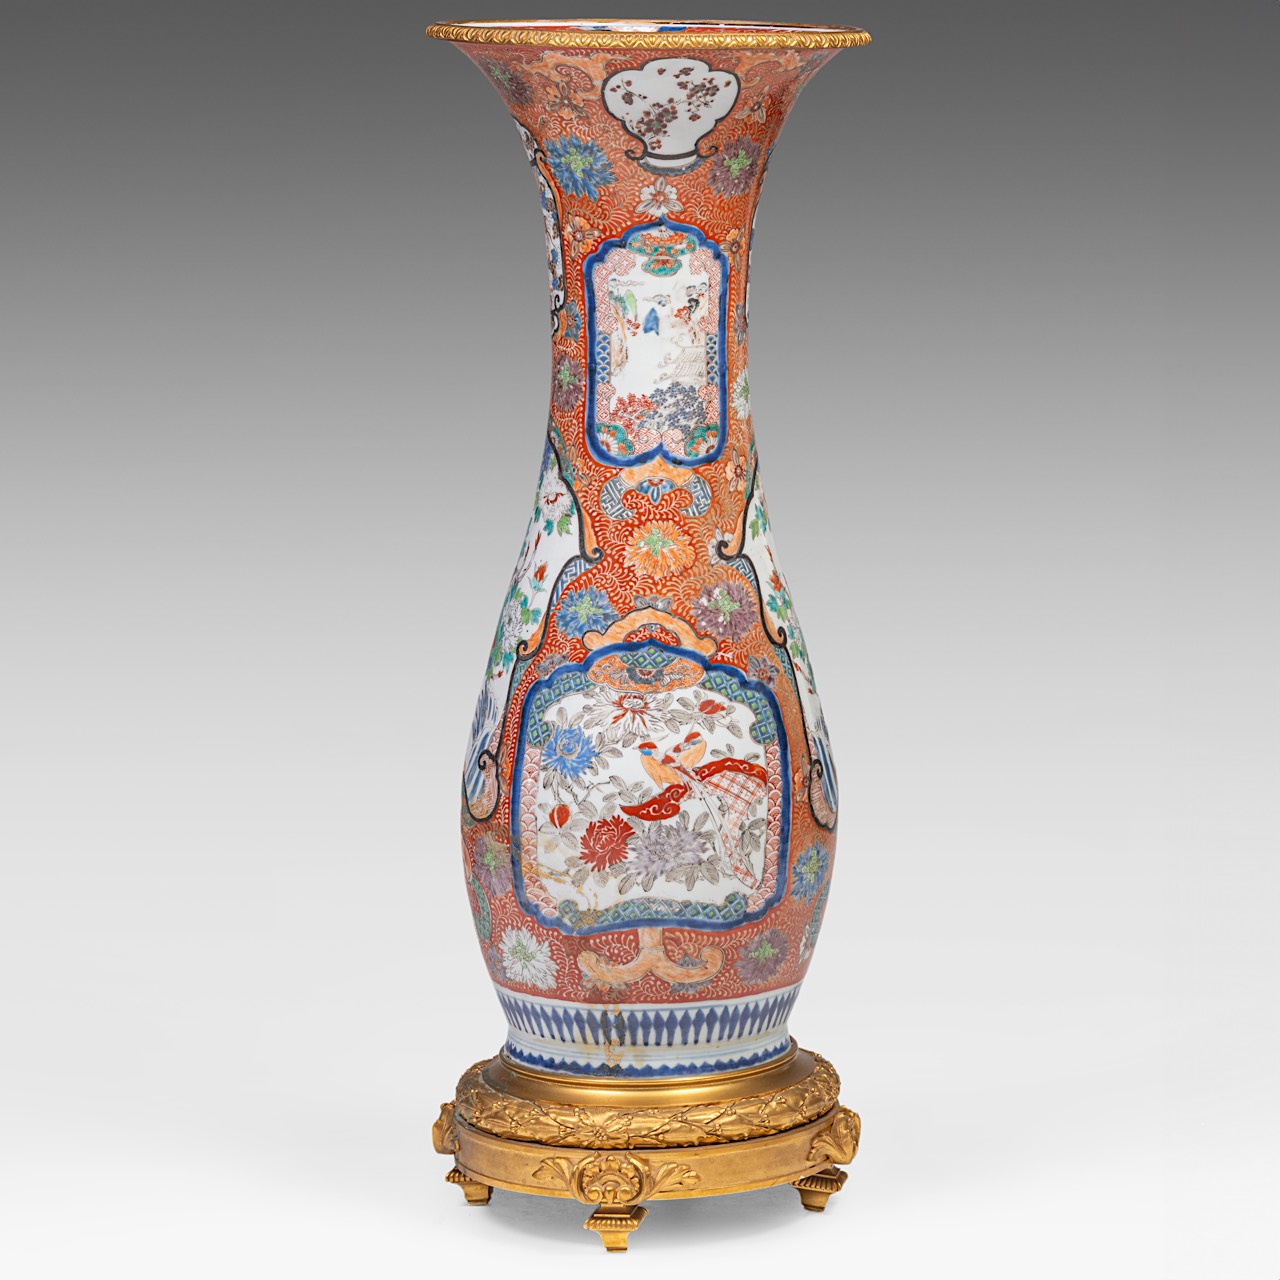 A large Japanese Imari vase, fixed on a gilt bronze foot and with a ditto rim, late Meiji (1868-1912